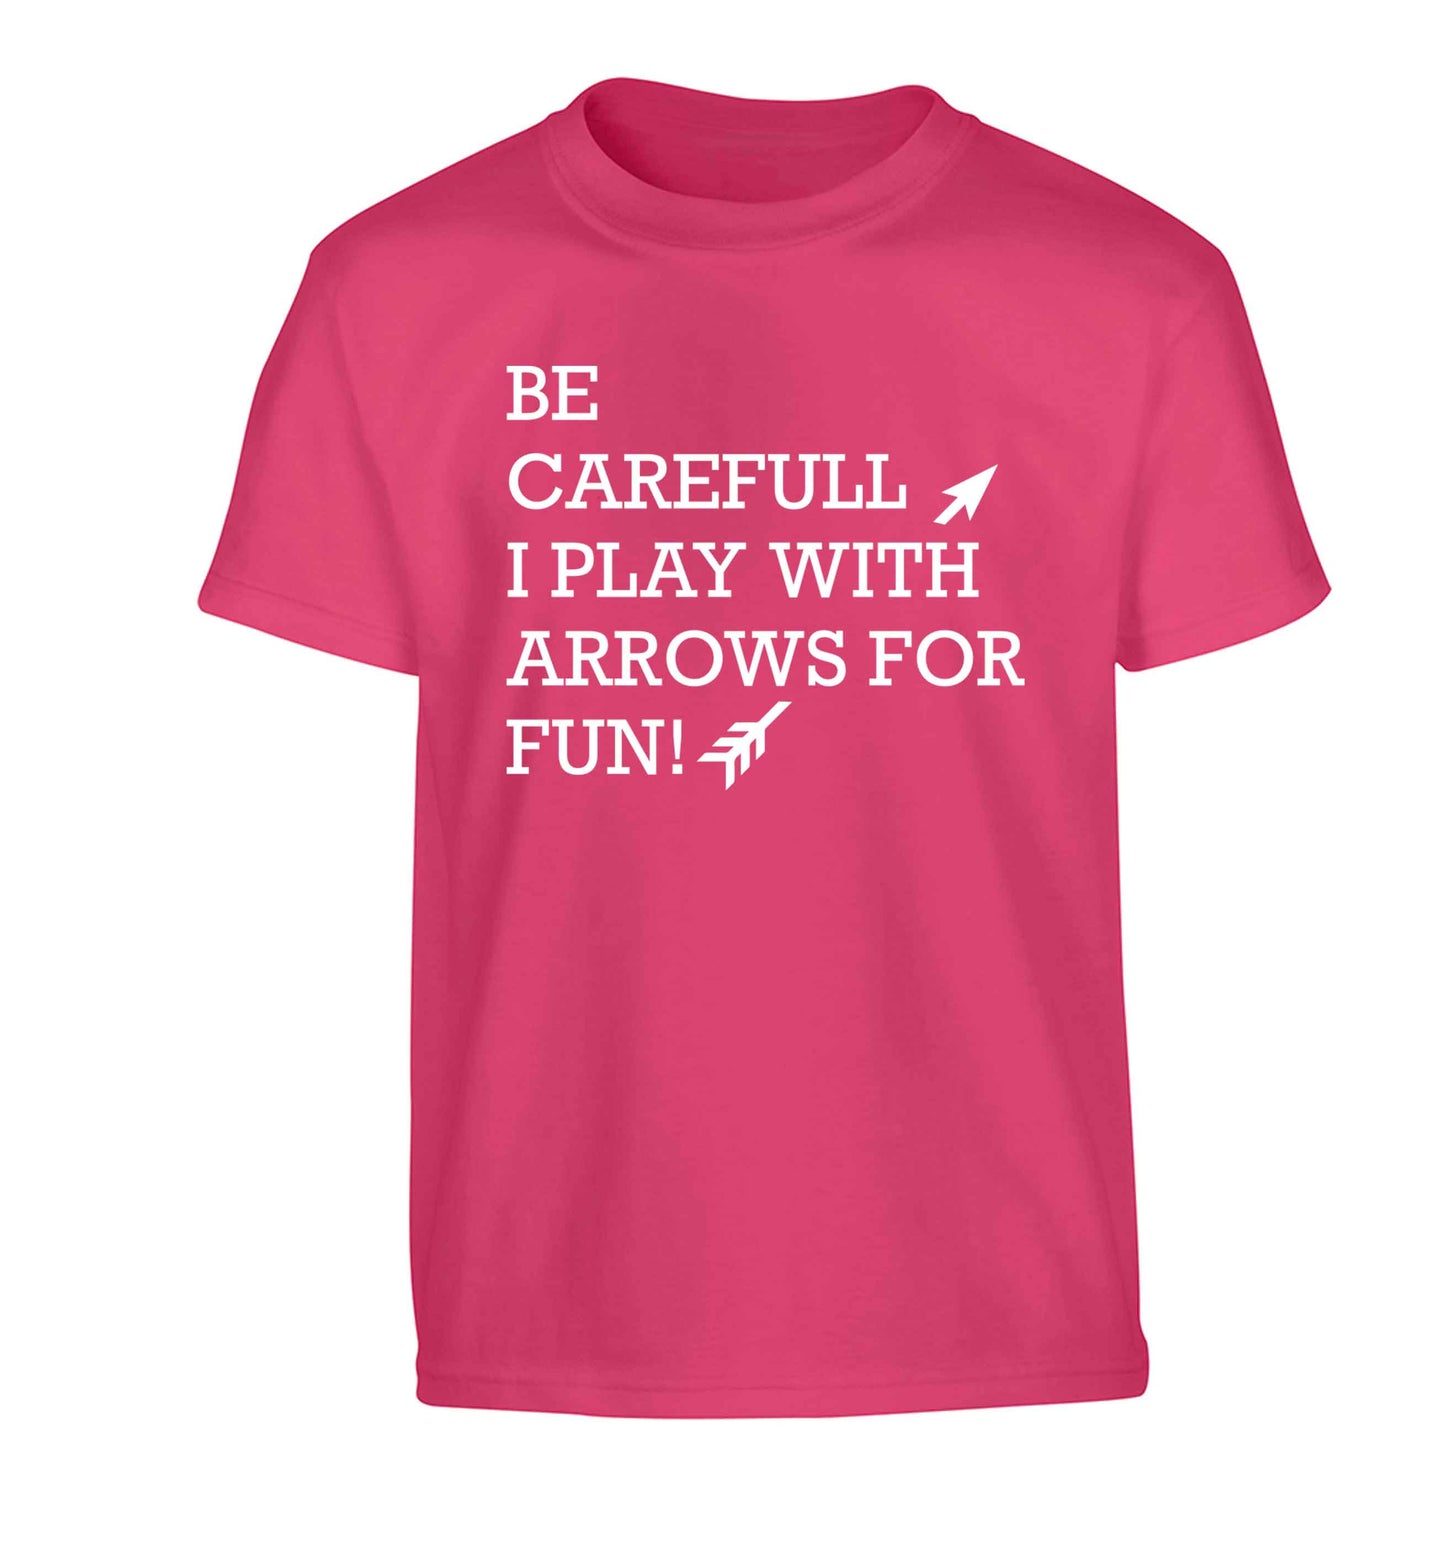 Be carefull I play with arrows for fun Children's pink Tshirt 12-13 Years